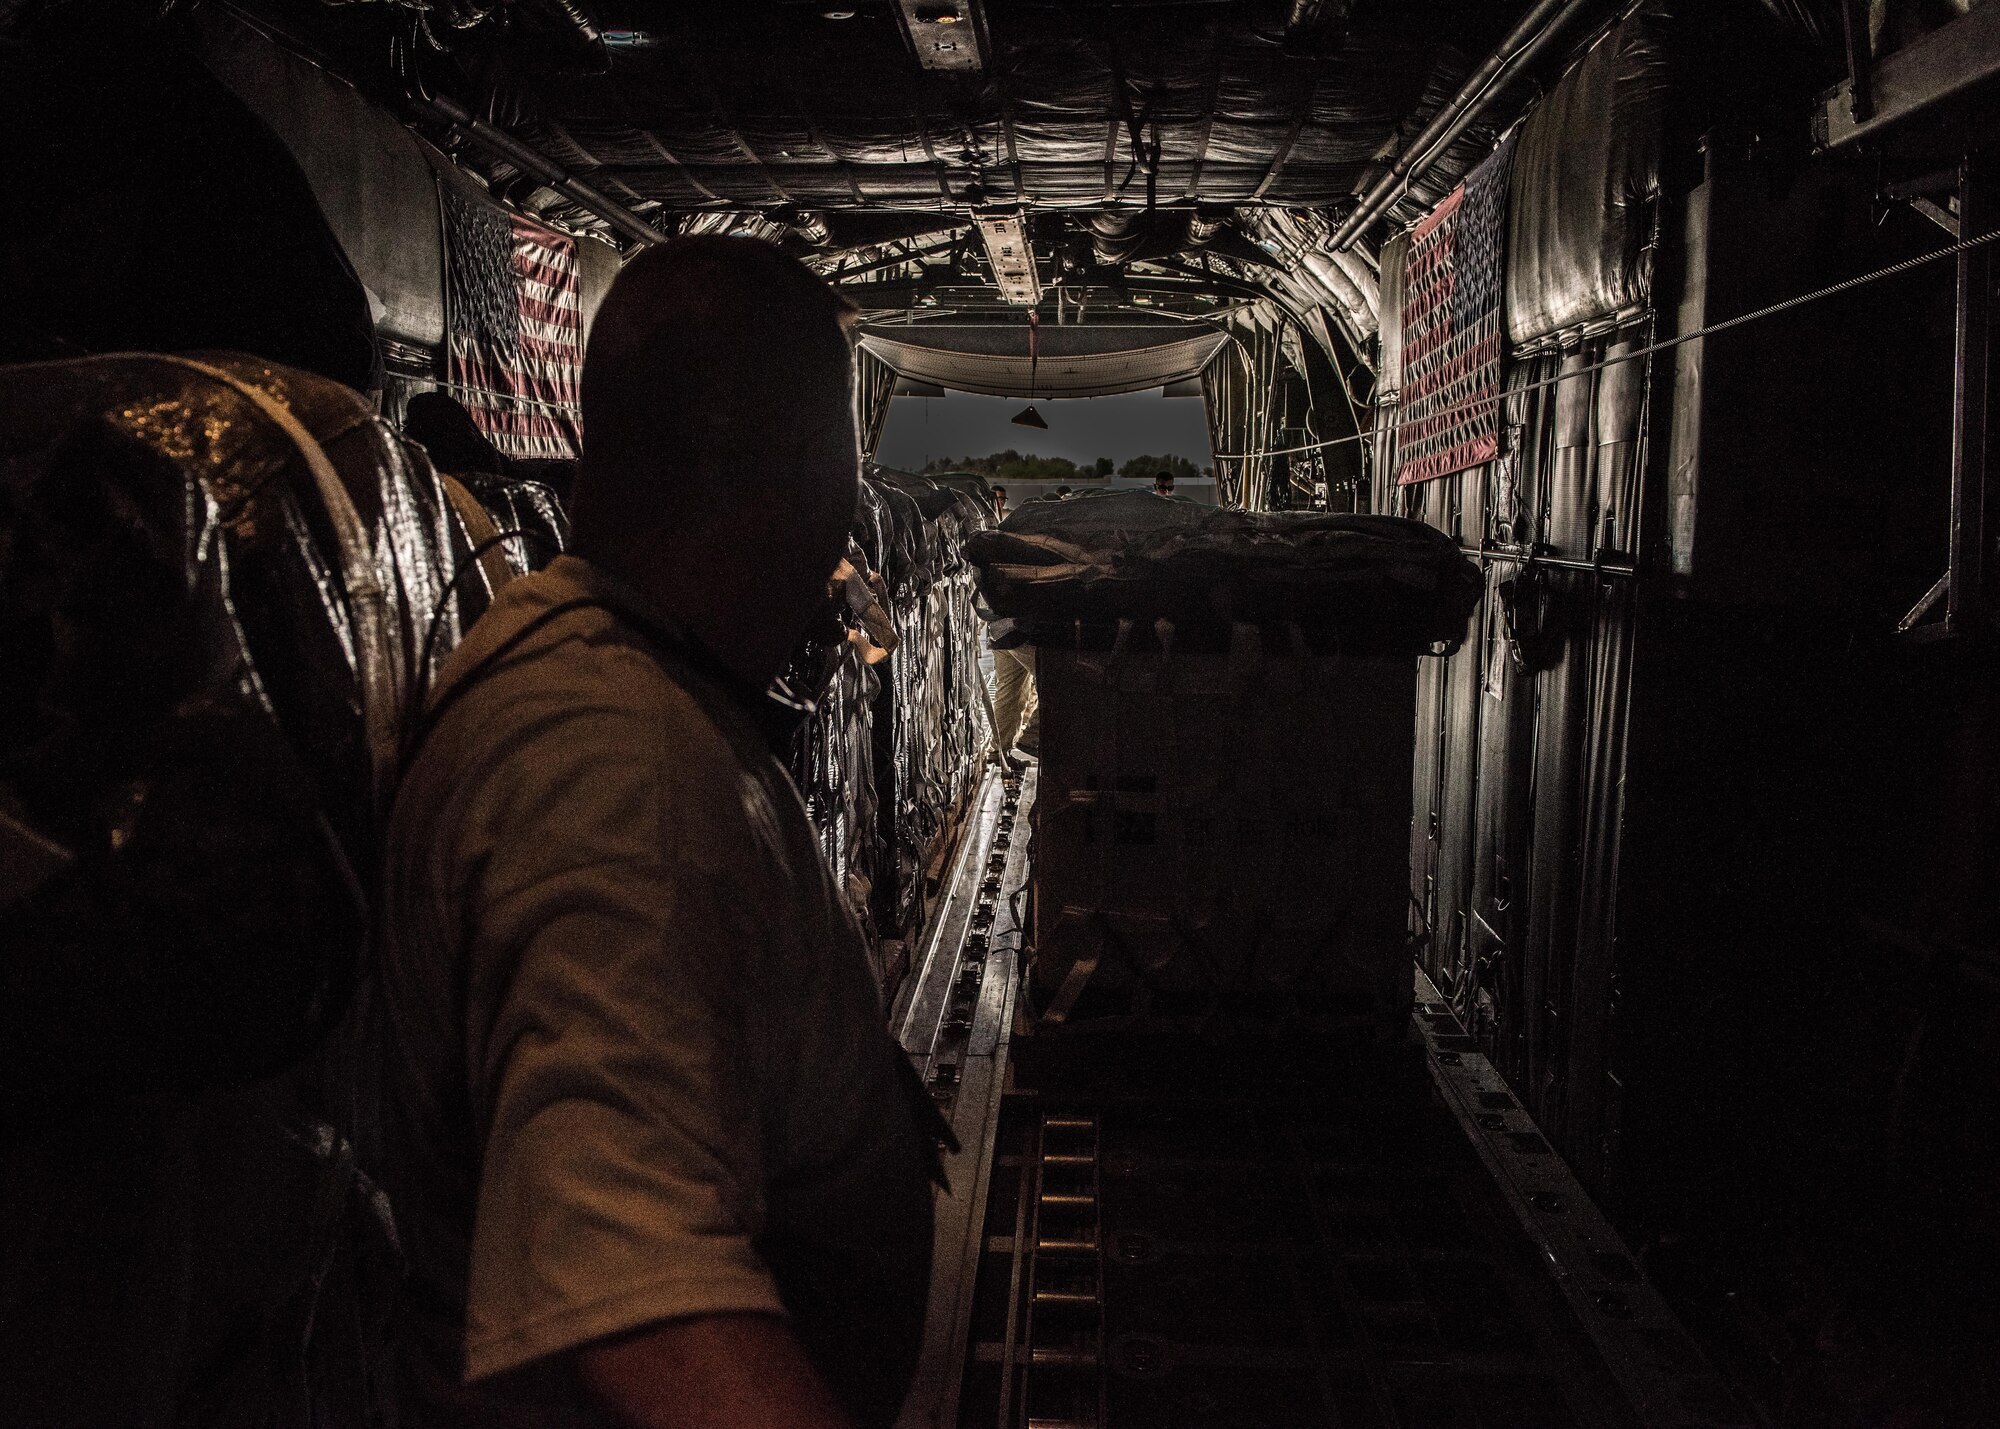 Chief Master Sgt. Ned Seaman, a loadmaster with the 737th Expeditionary Airlift Squadron, receives a container delivery system in the cargo bay of a C-130 Hercules in preparation for an air drop at an undisclosed location in Southwest Asia, over the weekend. Providing the fuel that keeps the fight going, the 386th Air Expeditionary Wing has delivered more than 80 tons of food, water and other supplies to various supported forces throughout the U.S. Air Forces Central Command area of responsibility in support of Combined Joint Task Force - Operation Inherent Resolve ground troops. (U.S. Air Force photo/Tech. Sgt. Jonathan Hehnly)